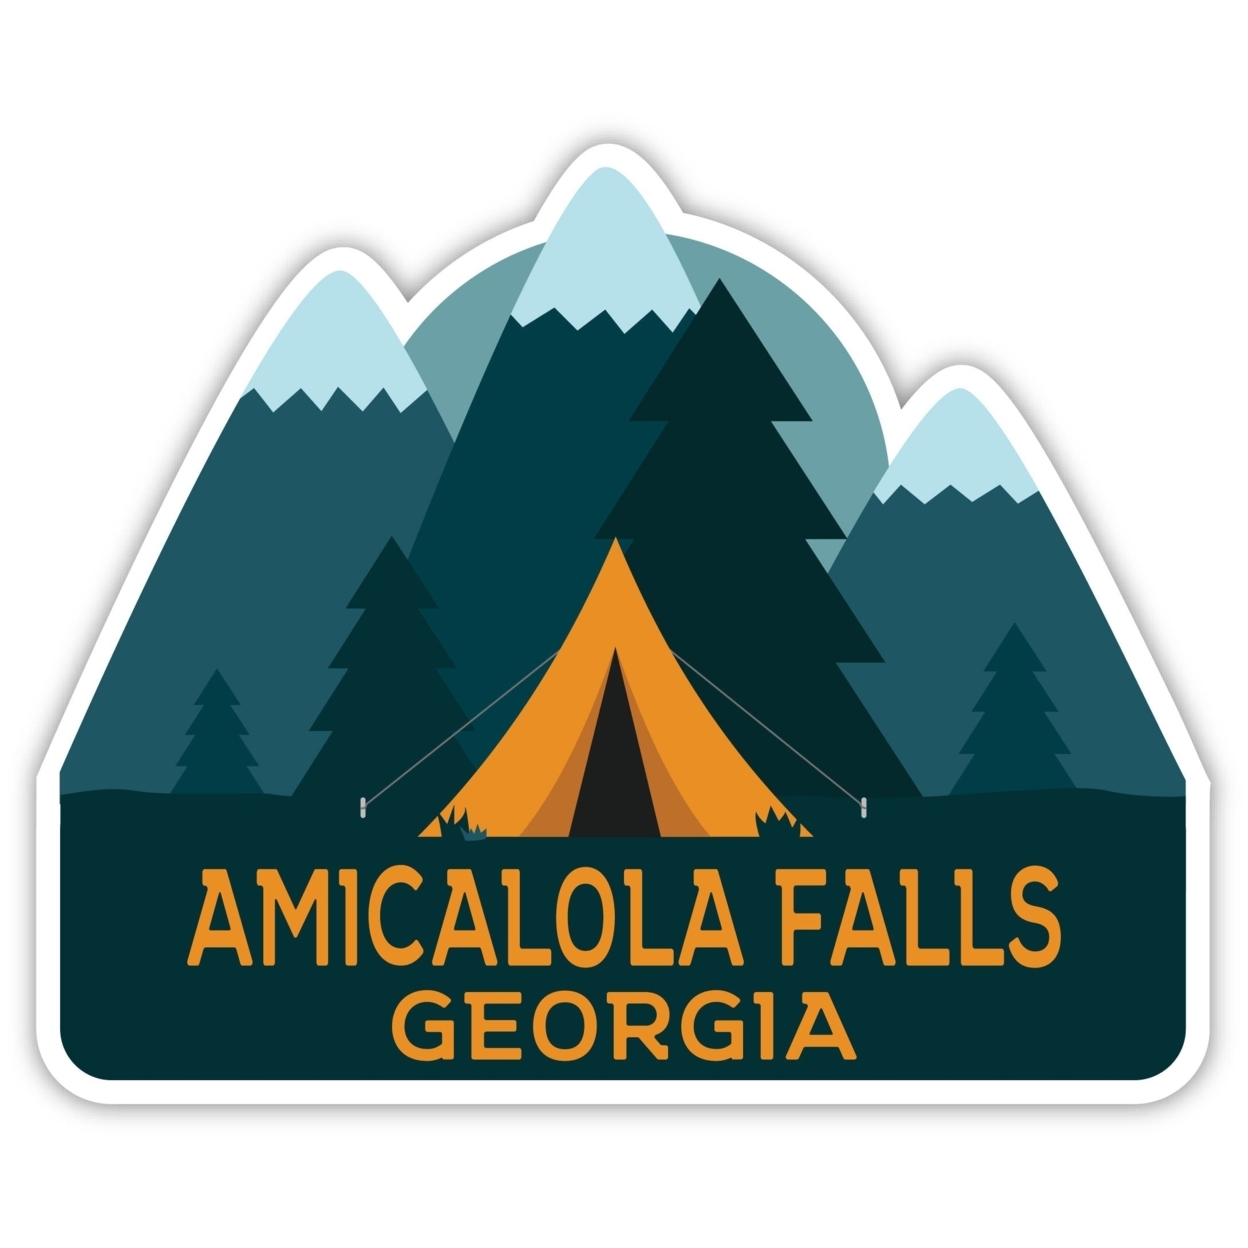 Amicalola Falls Georgia Souvenir Decorative Stickers (Choose Theme And Size) - 4-Pack, 4-Inch, Great Outdoors